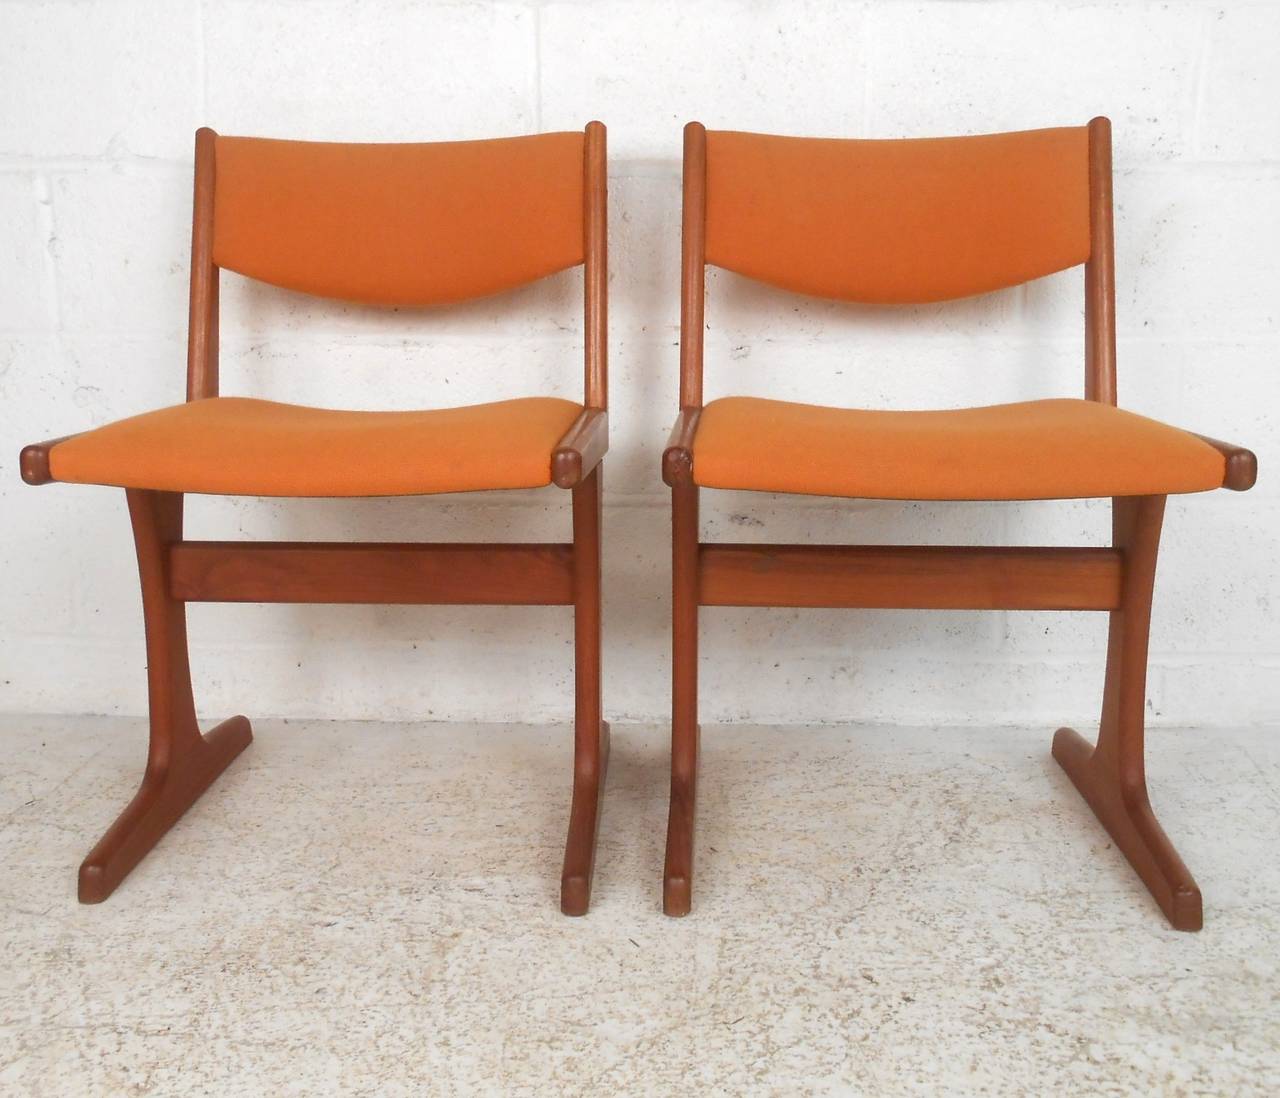 This midcentury set of teak dining chairs are comfortably designed and feature stabilizing stretchers along with unique frames. Please confirm item location (NY or NJ).